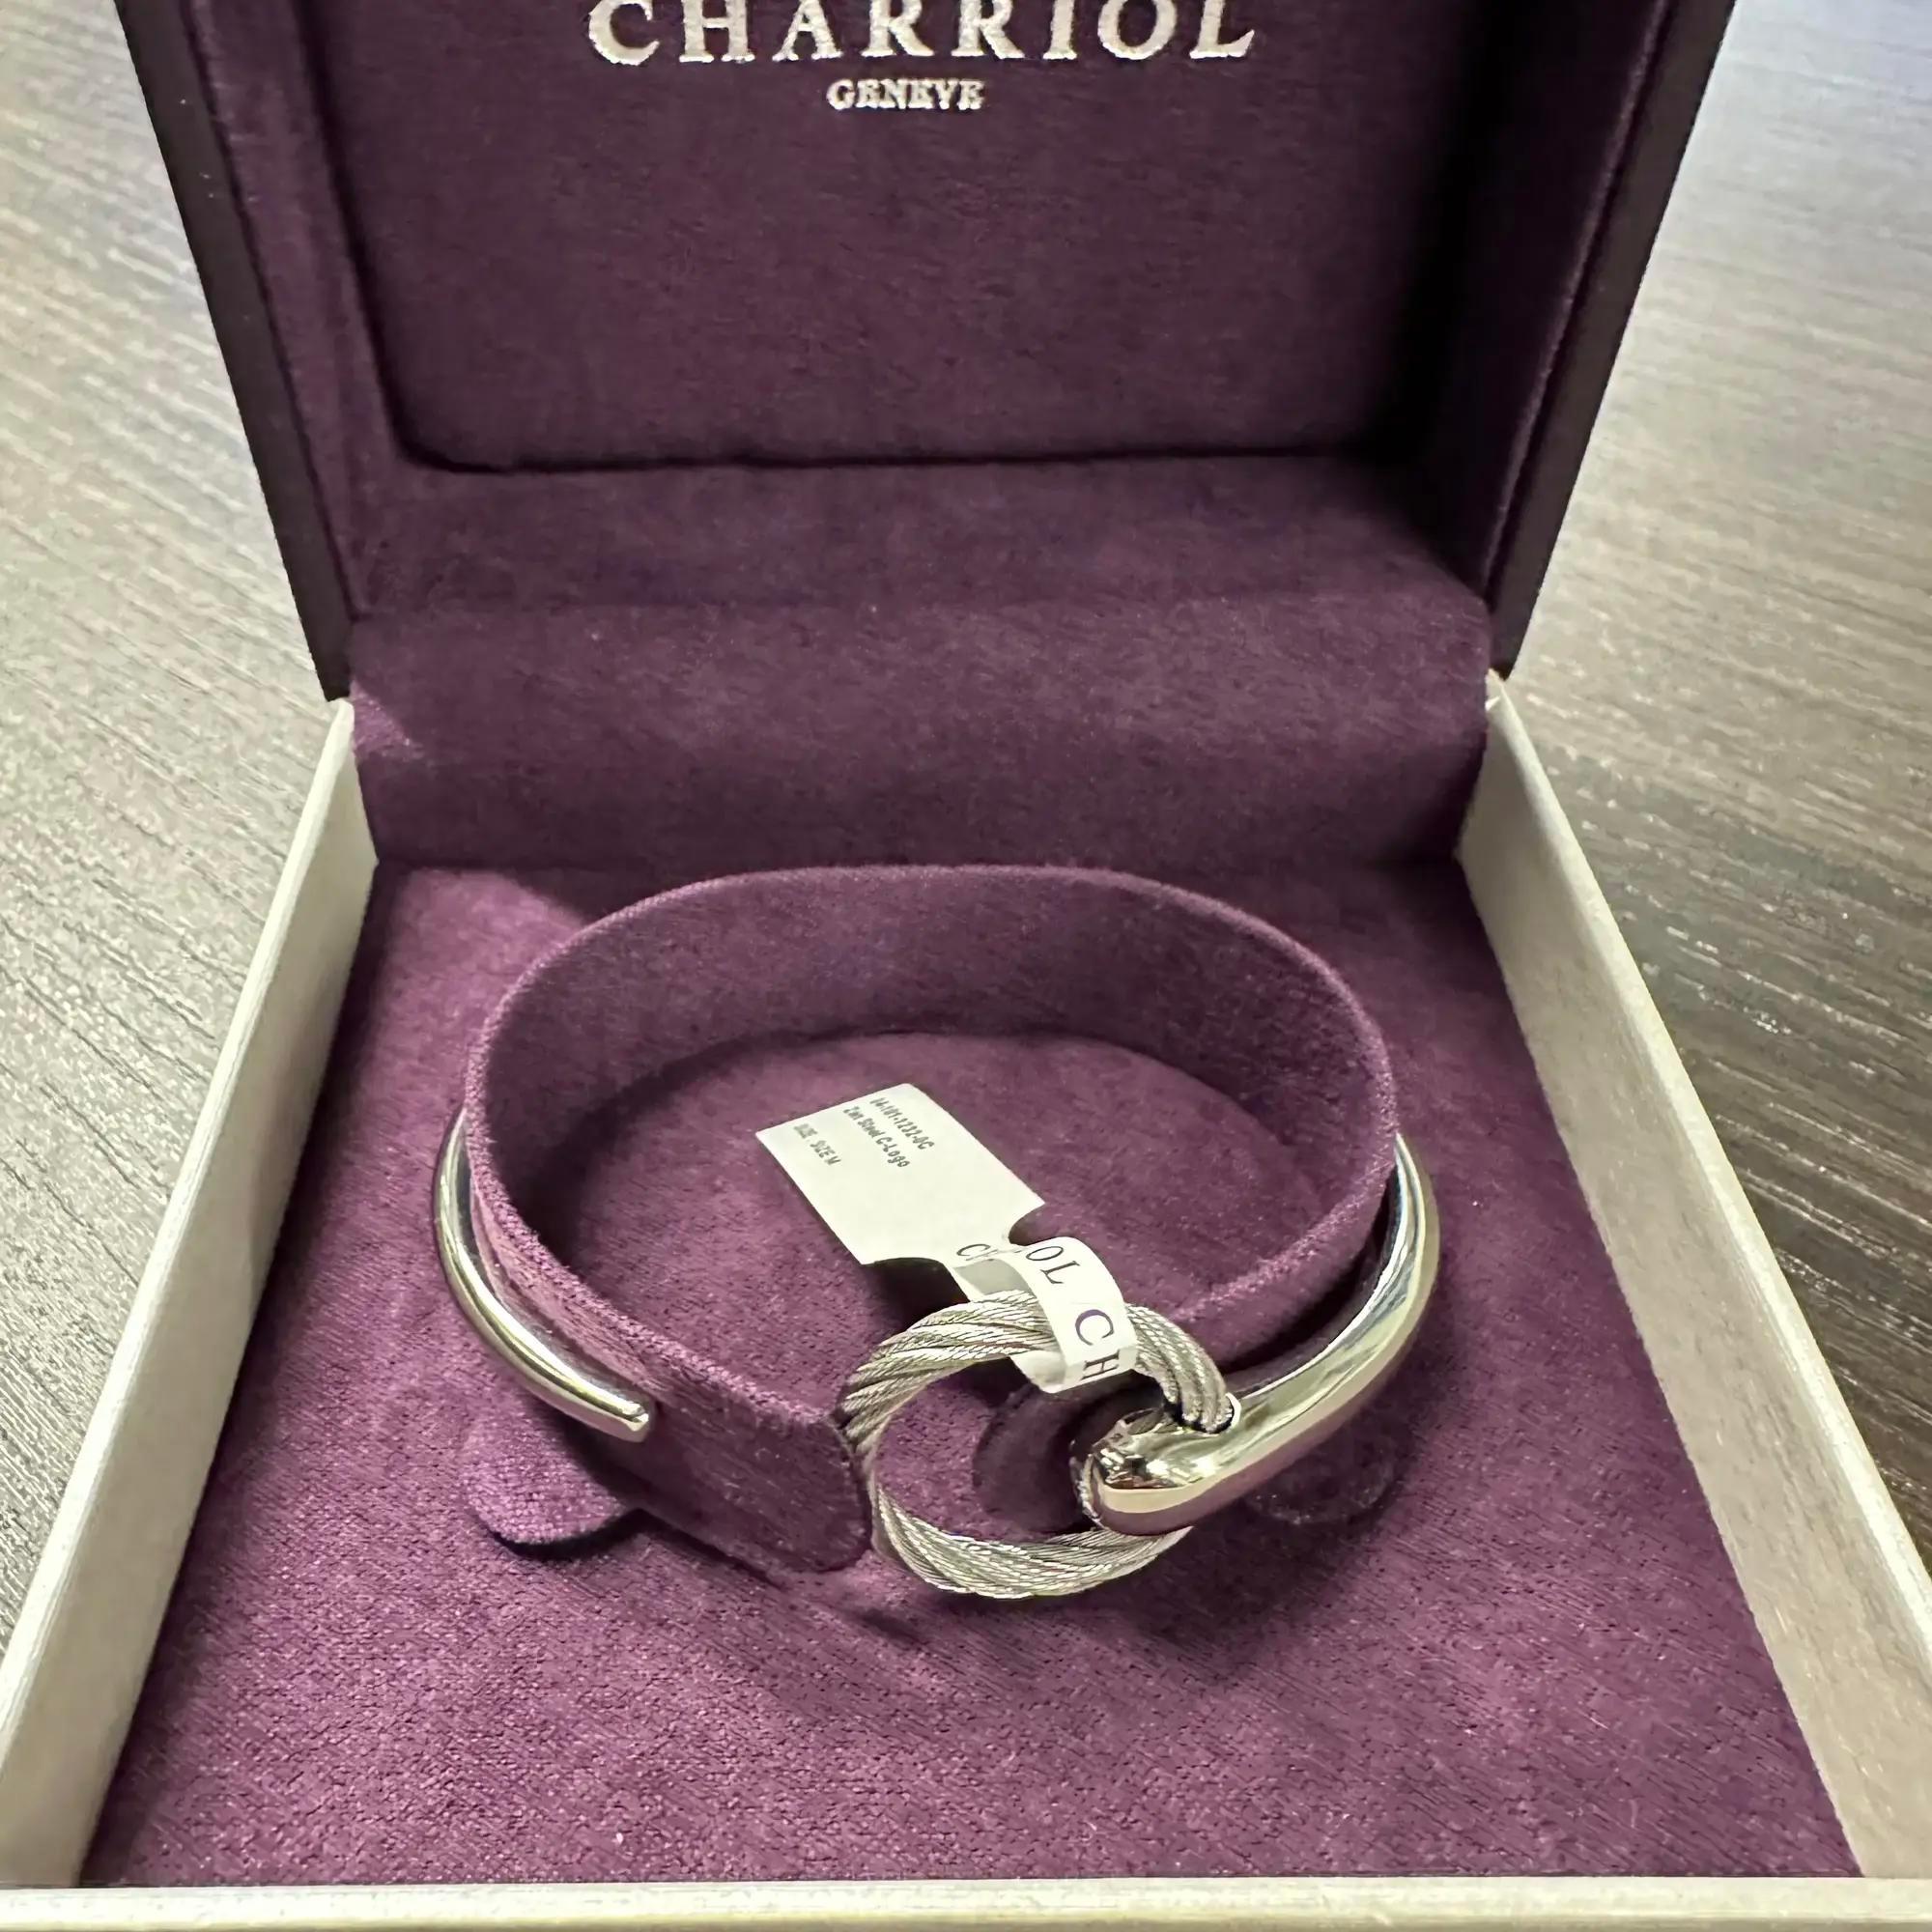 This gorgeous Charriol Infinity Zen open cuff bangle bracelet is a perfect addition to your everyday look. Super stackable and easy to wear, it features a stainless steel hinged bangle with a steel cable circular motif at one end. Size: Medium.